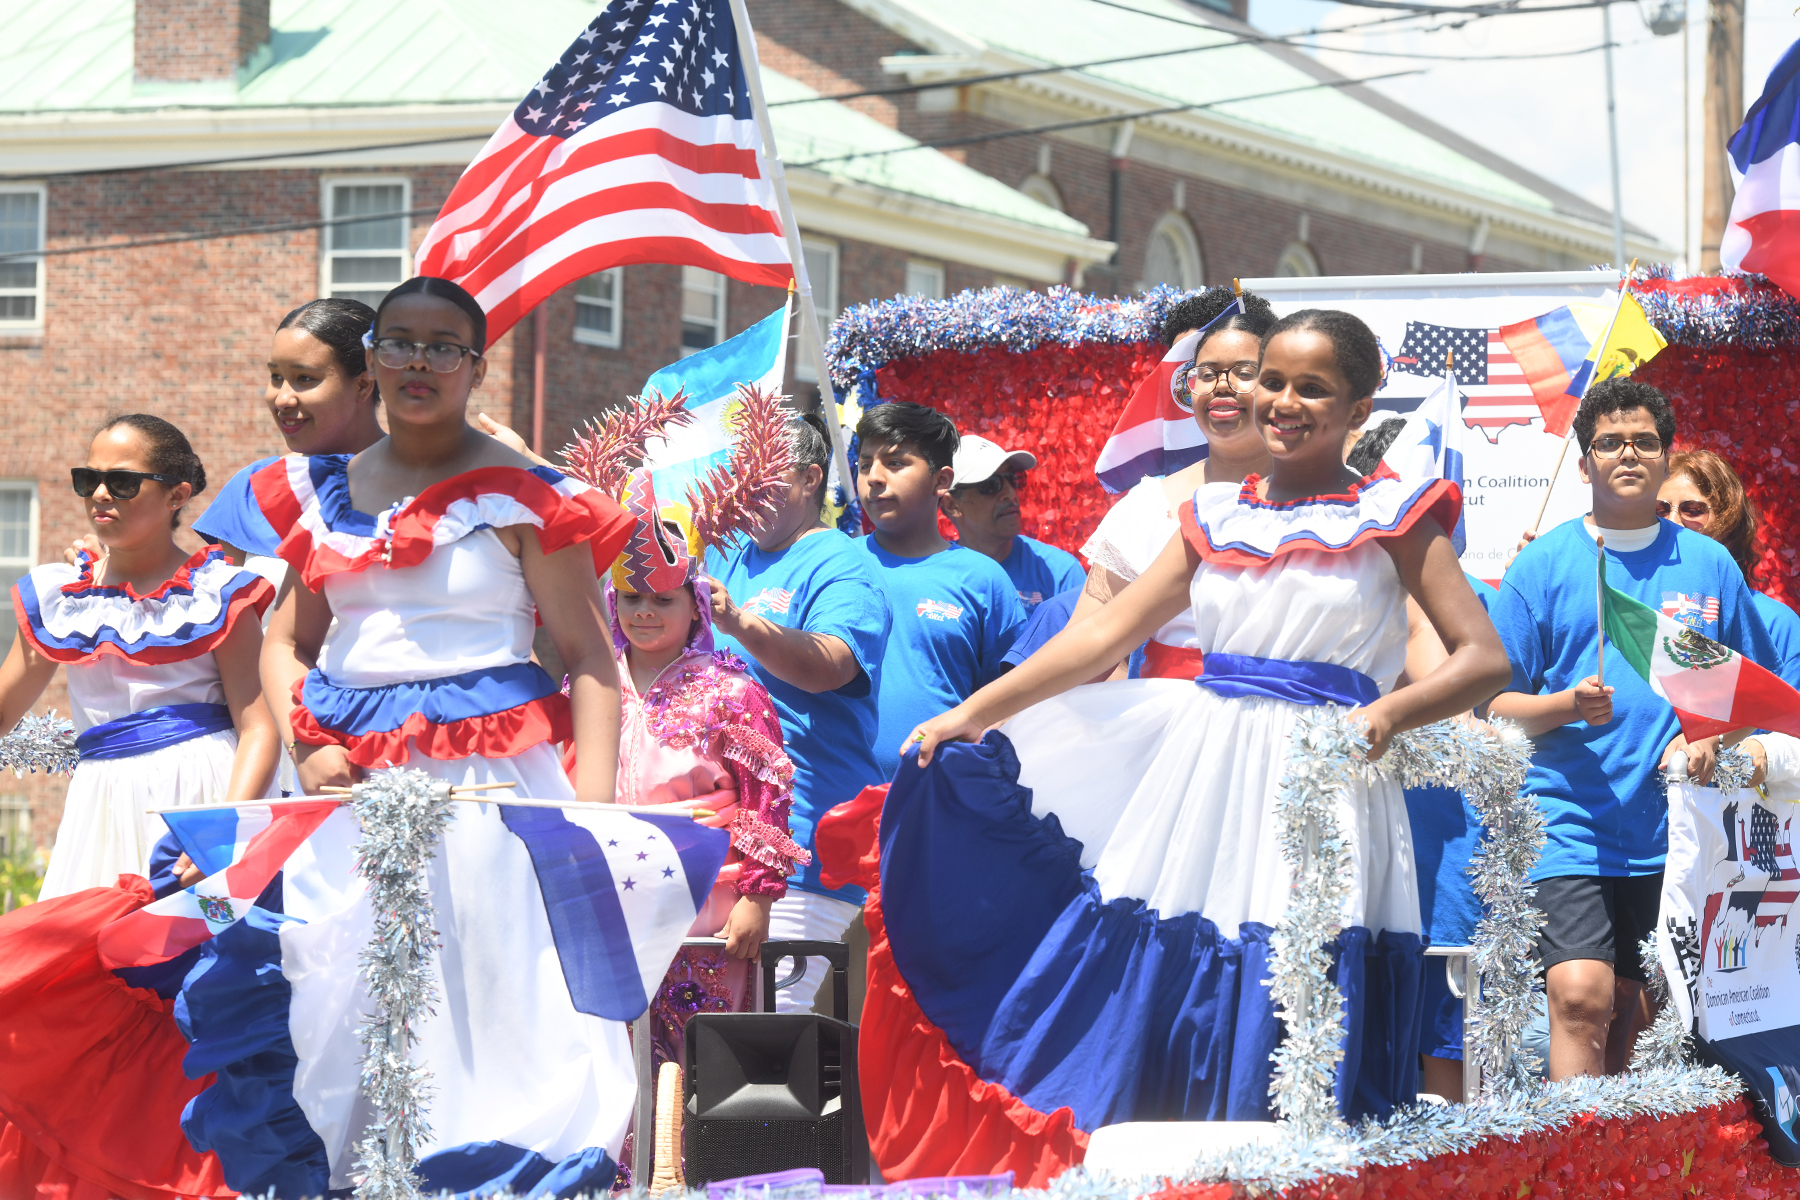 Barbenheimer, Puerto Rican Festival 25+ things to do in CT pic